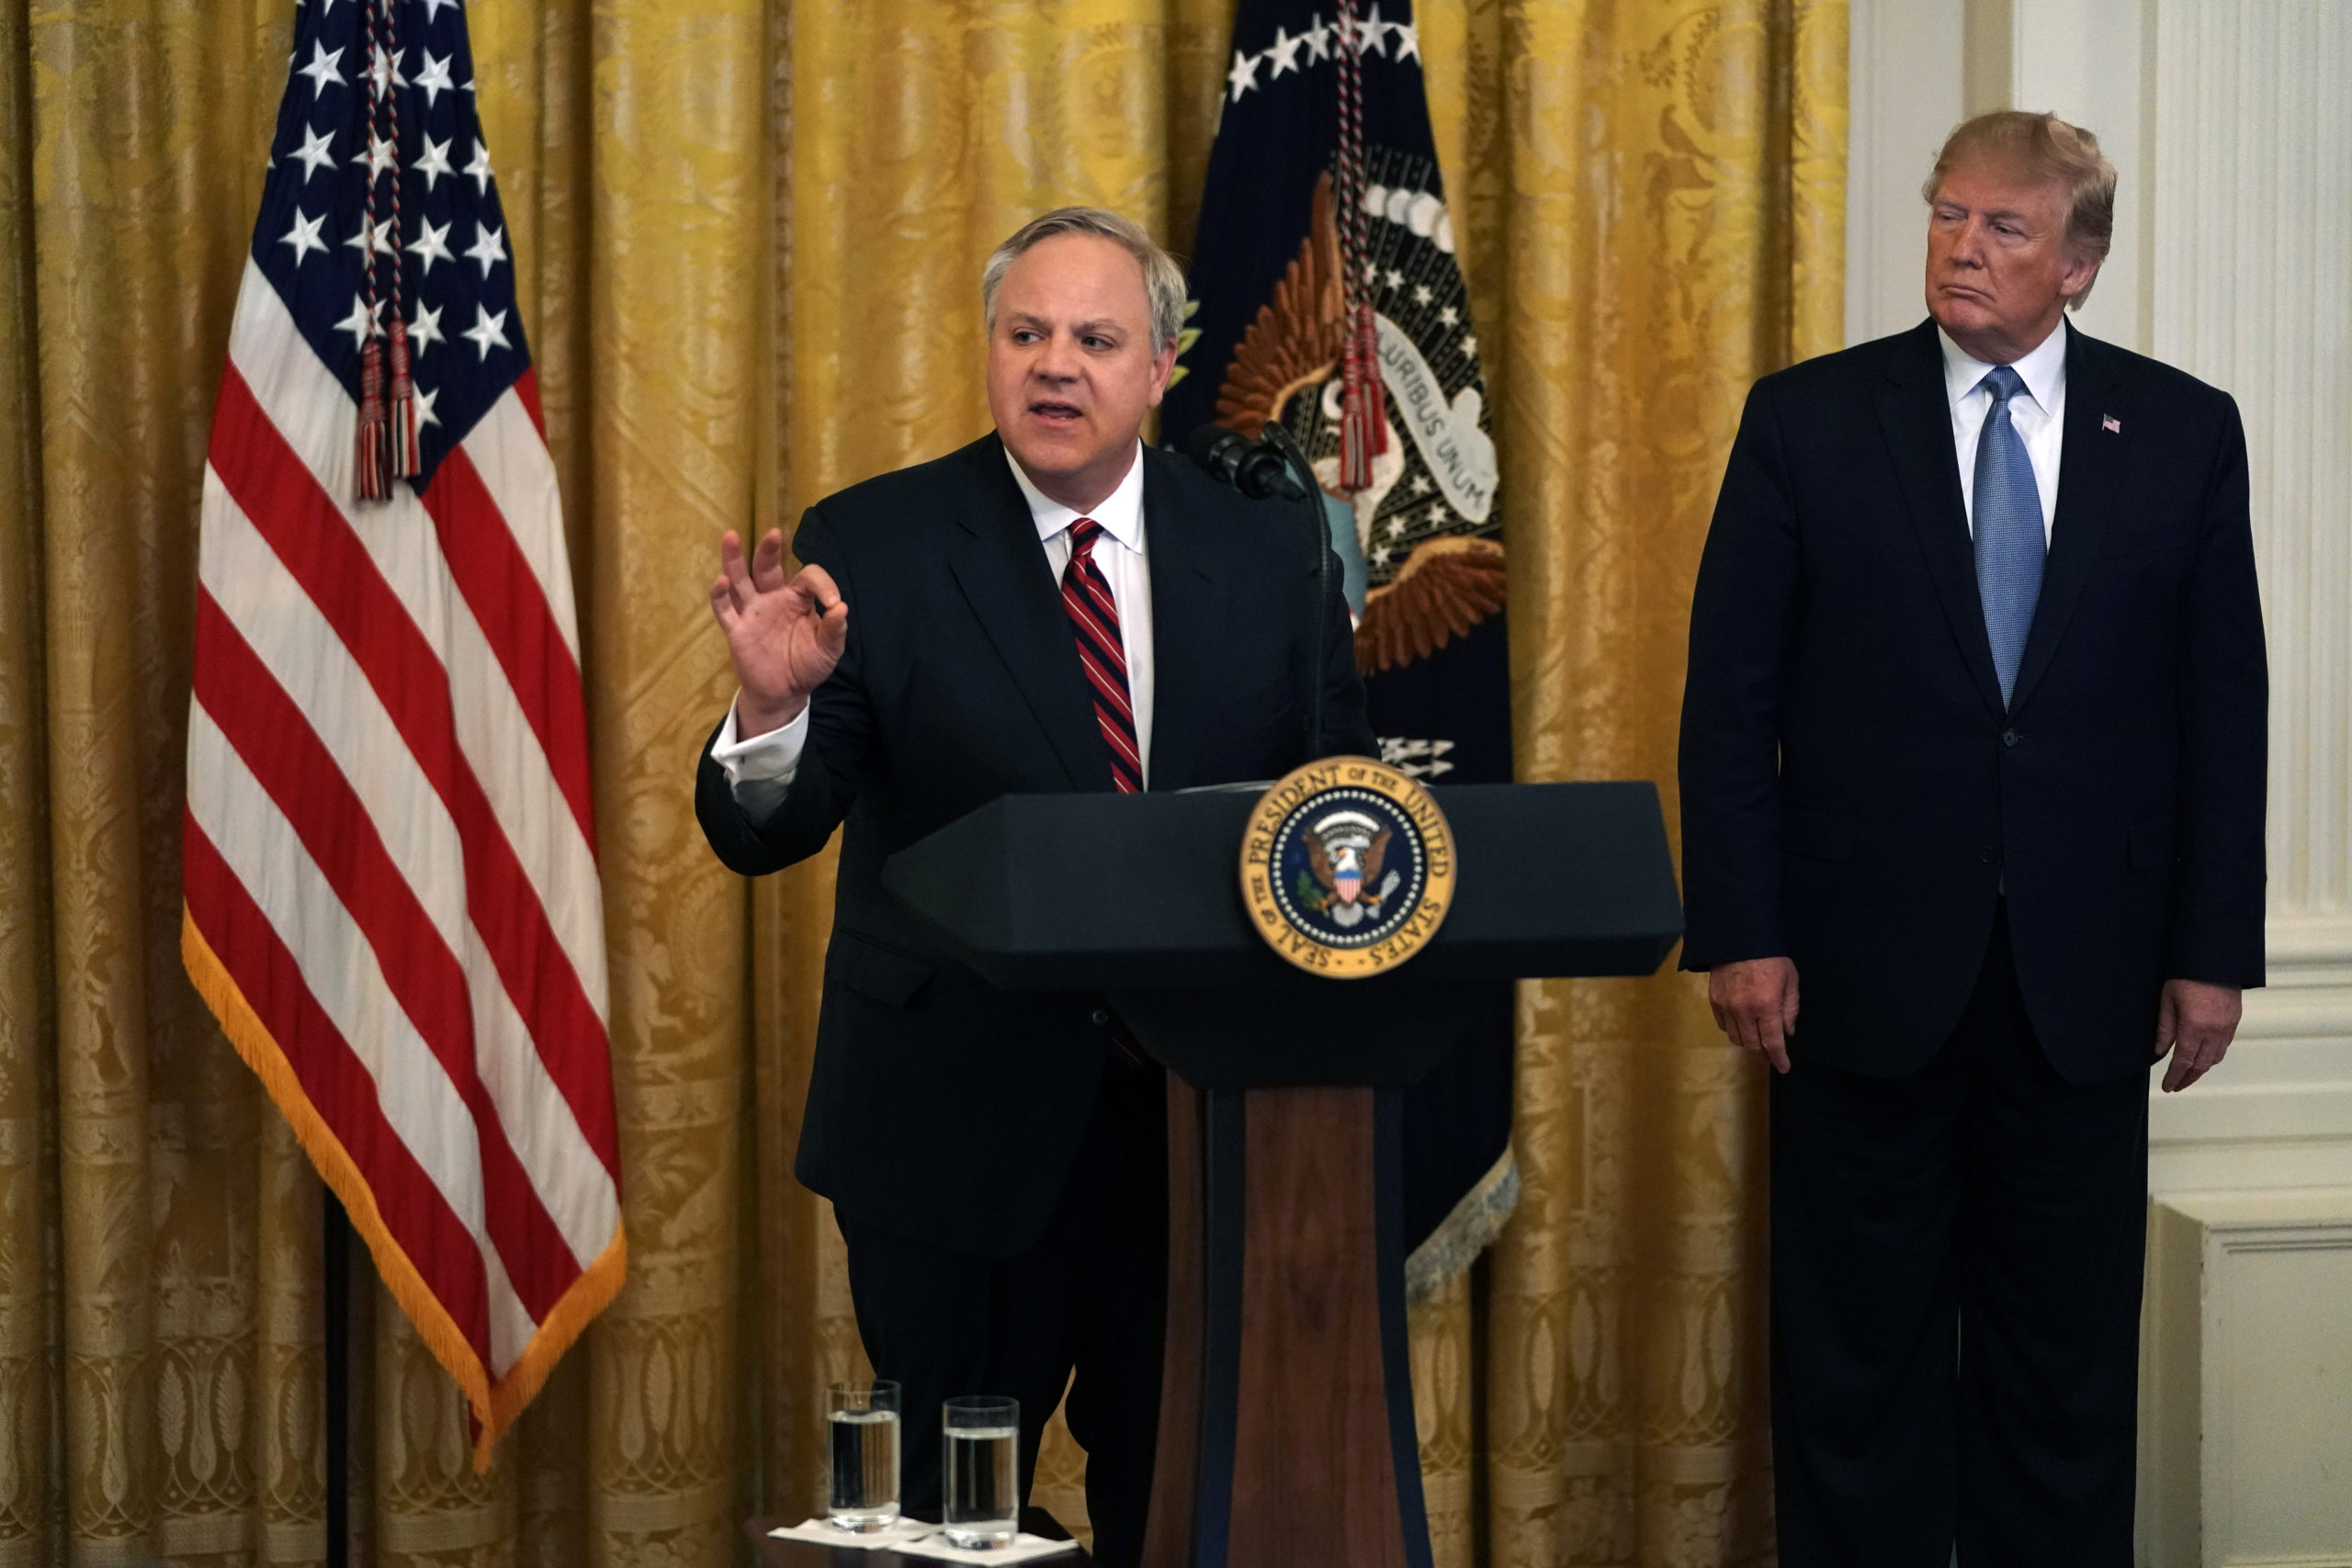 Former Secretary of Interior David Bernhardt speaks as former President Donald Trump looks on during an event on July 7, 2019. (Alex Wong/Getty Images)